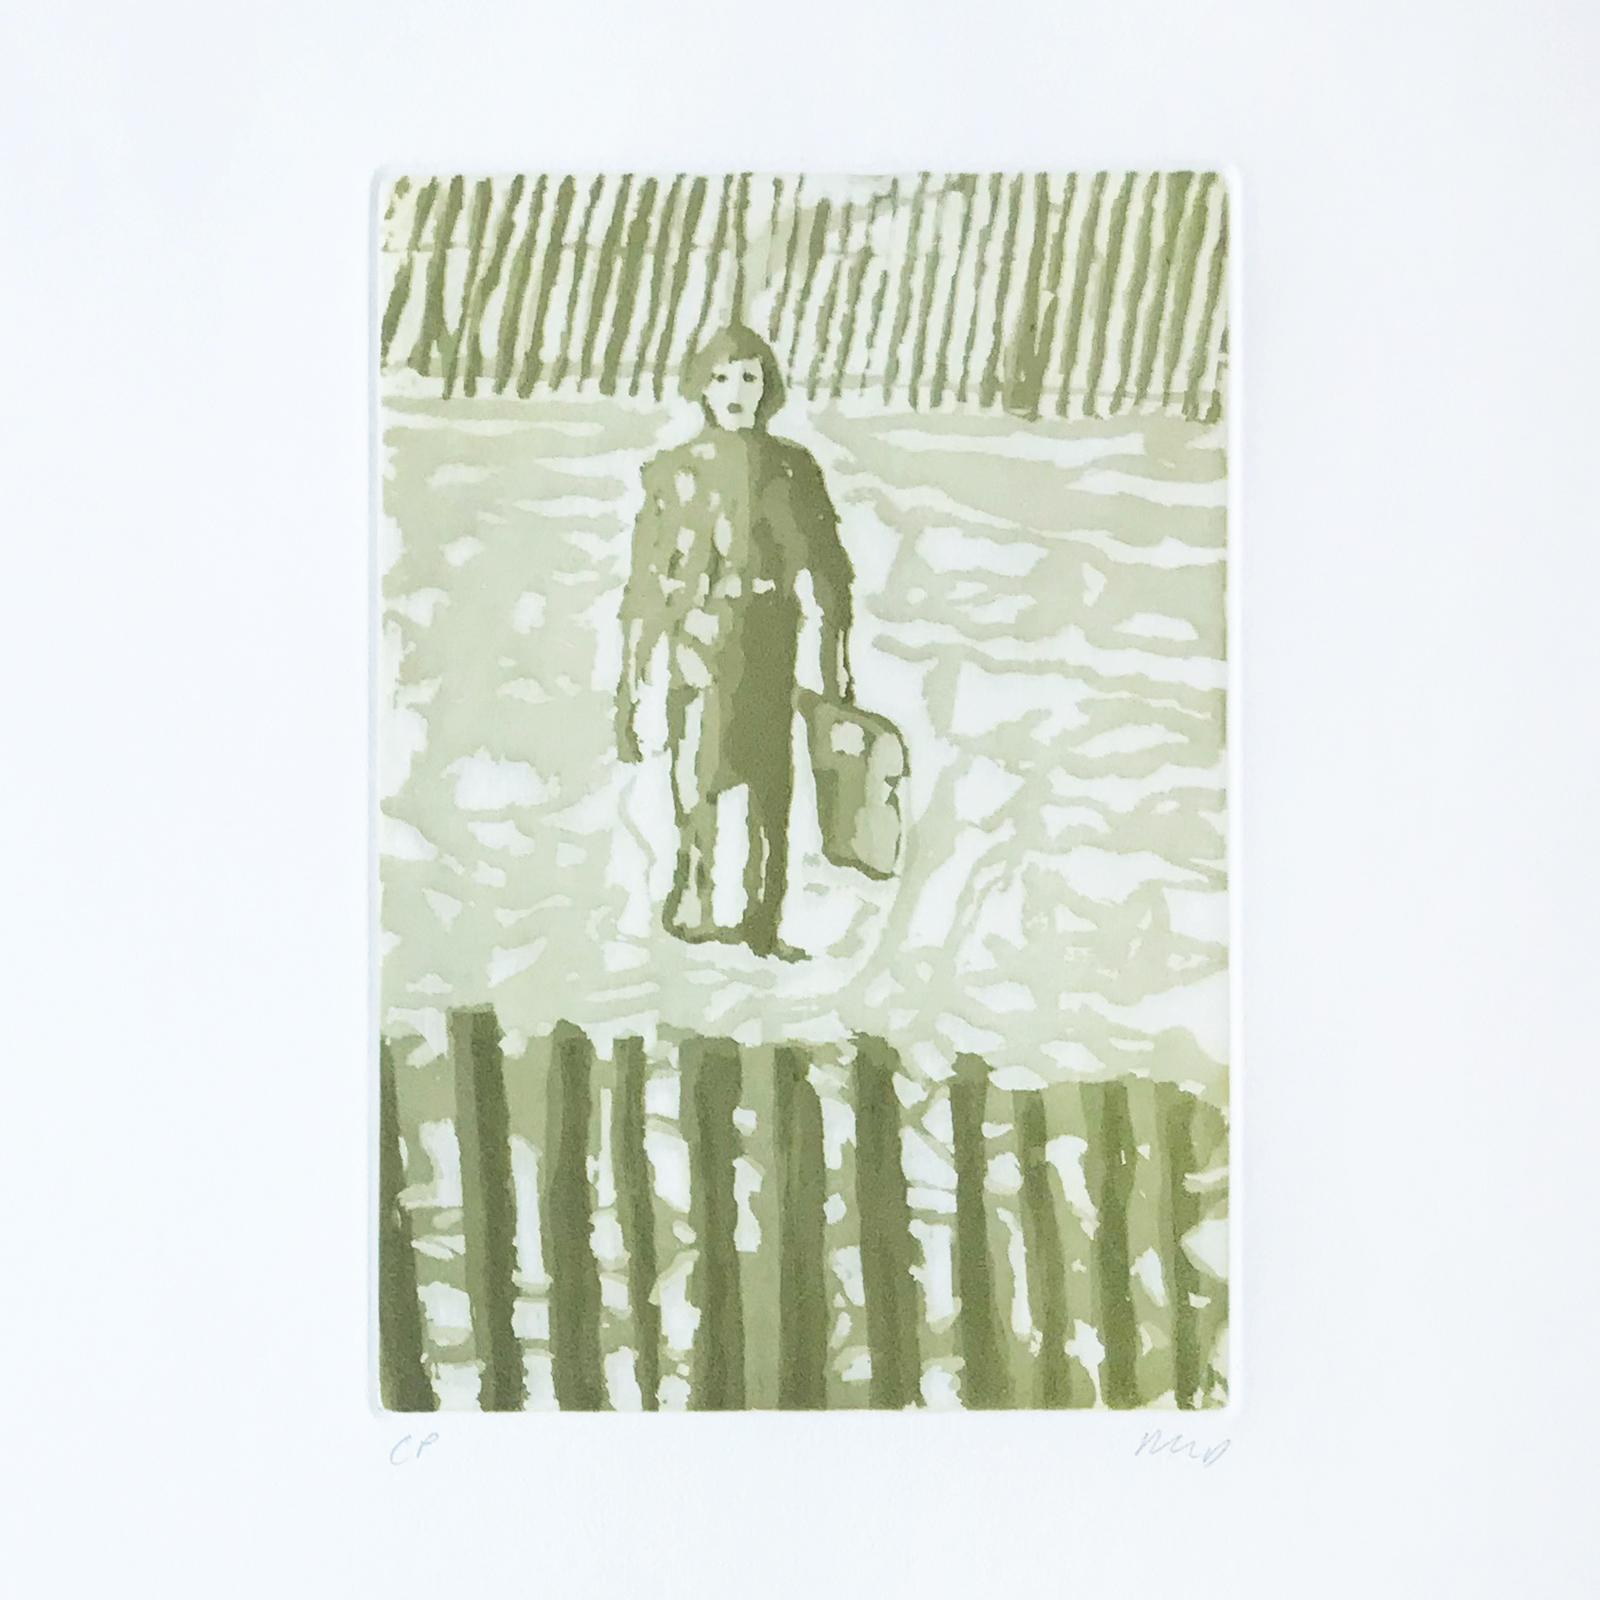 Untitled (from Blizzard ’77), Etching and Aquatint, 1997, Contemporary Art - Print by Peter Doig